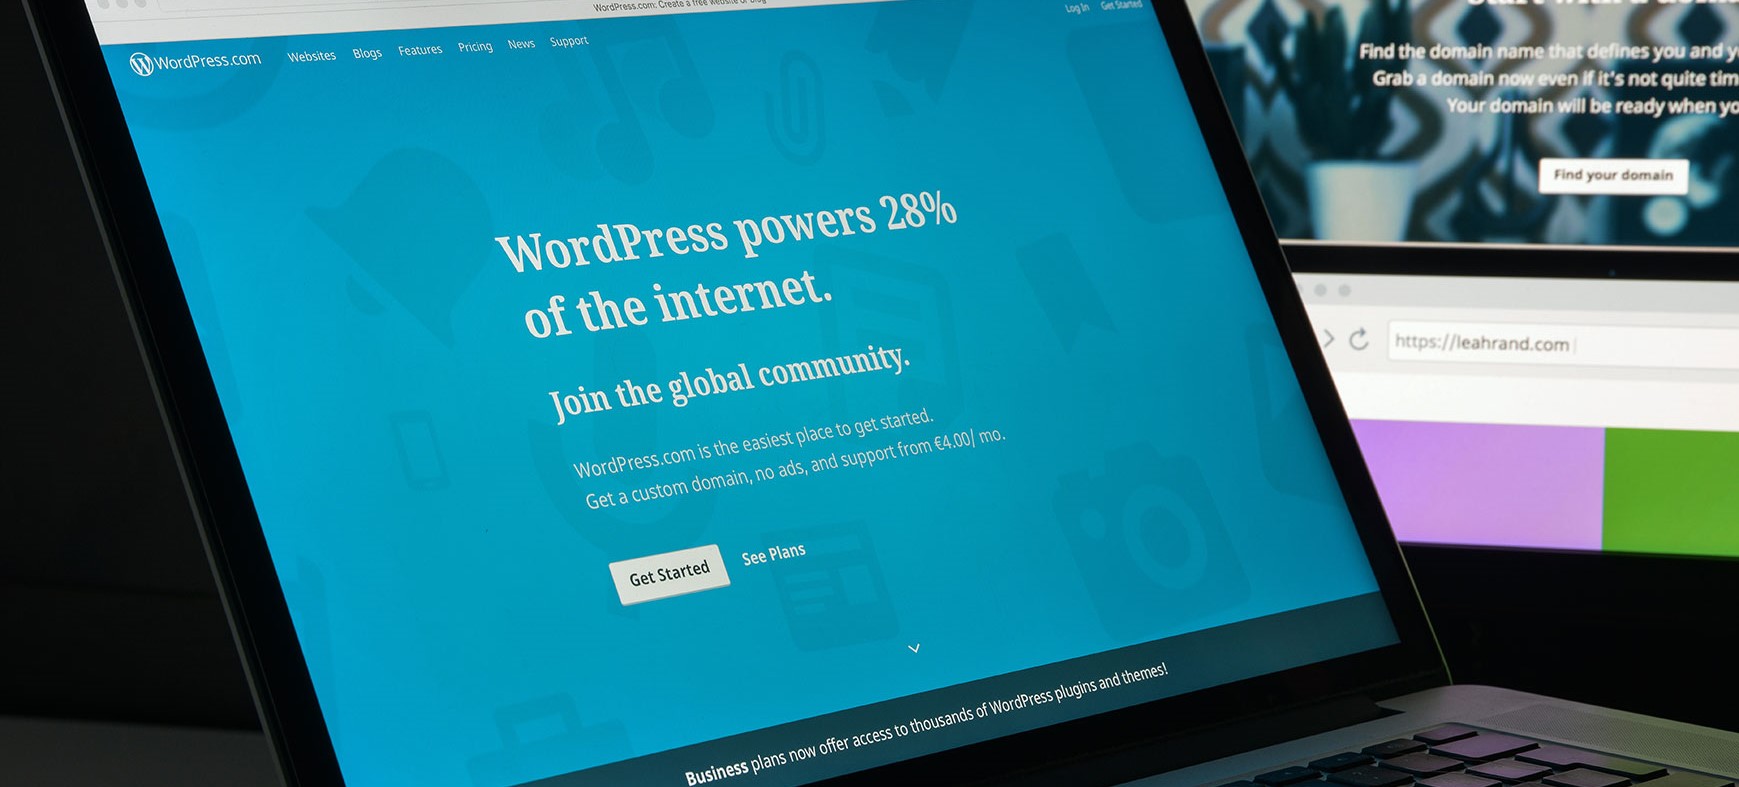 WordPress Powers the a large portion of the internets websites